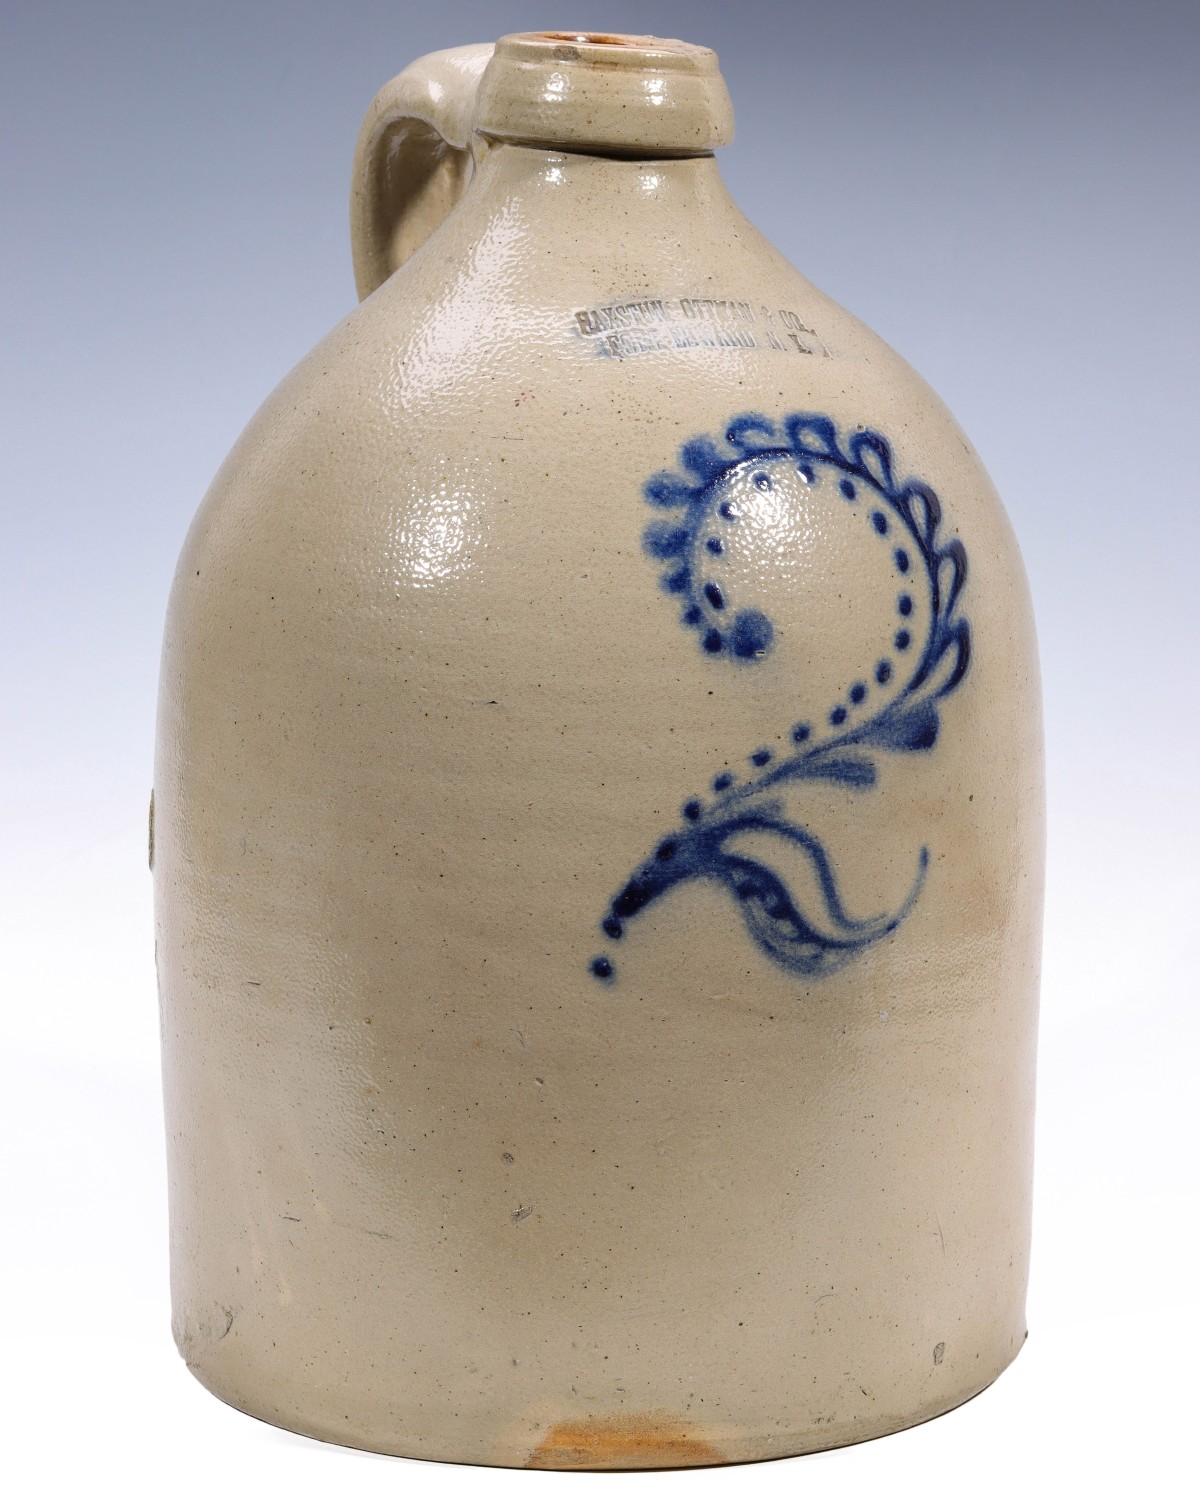 A BLUE DECORATED STONEWARE JUG STAMPED HAXSTUN